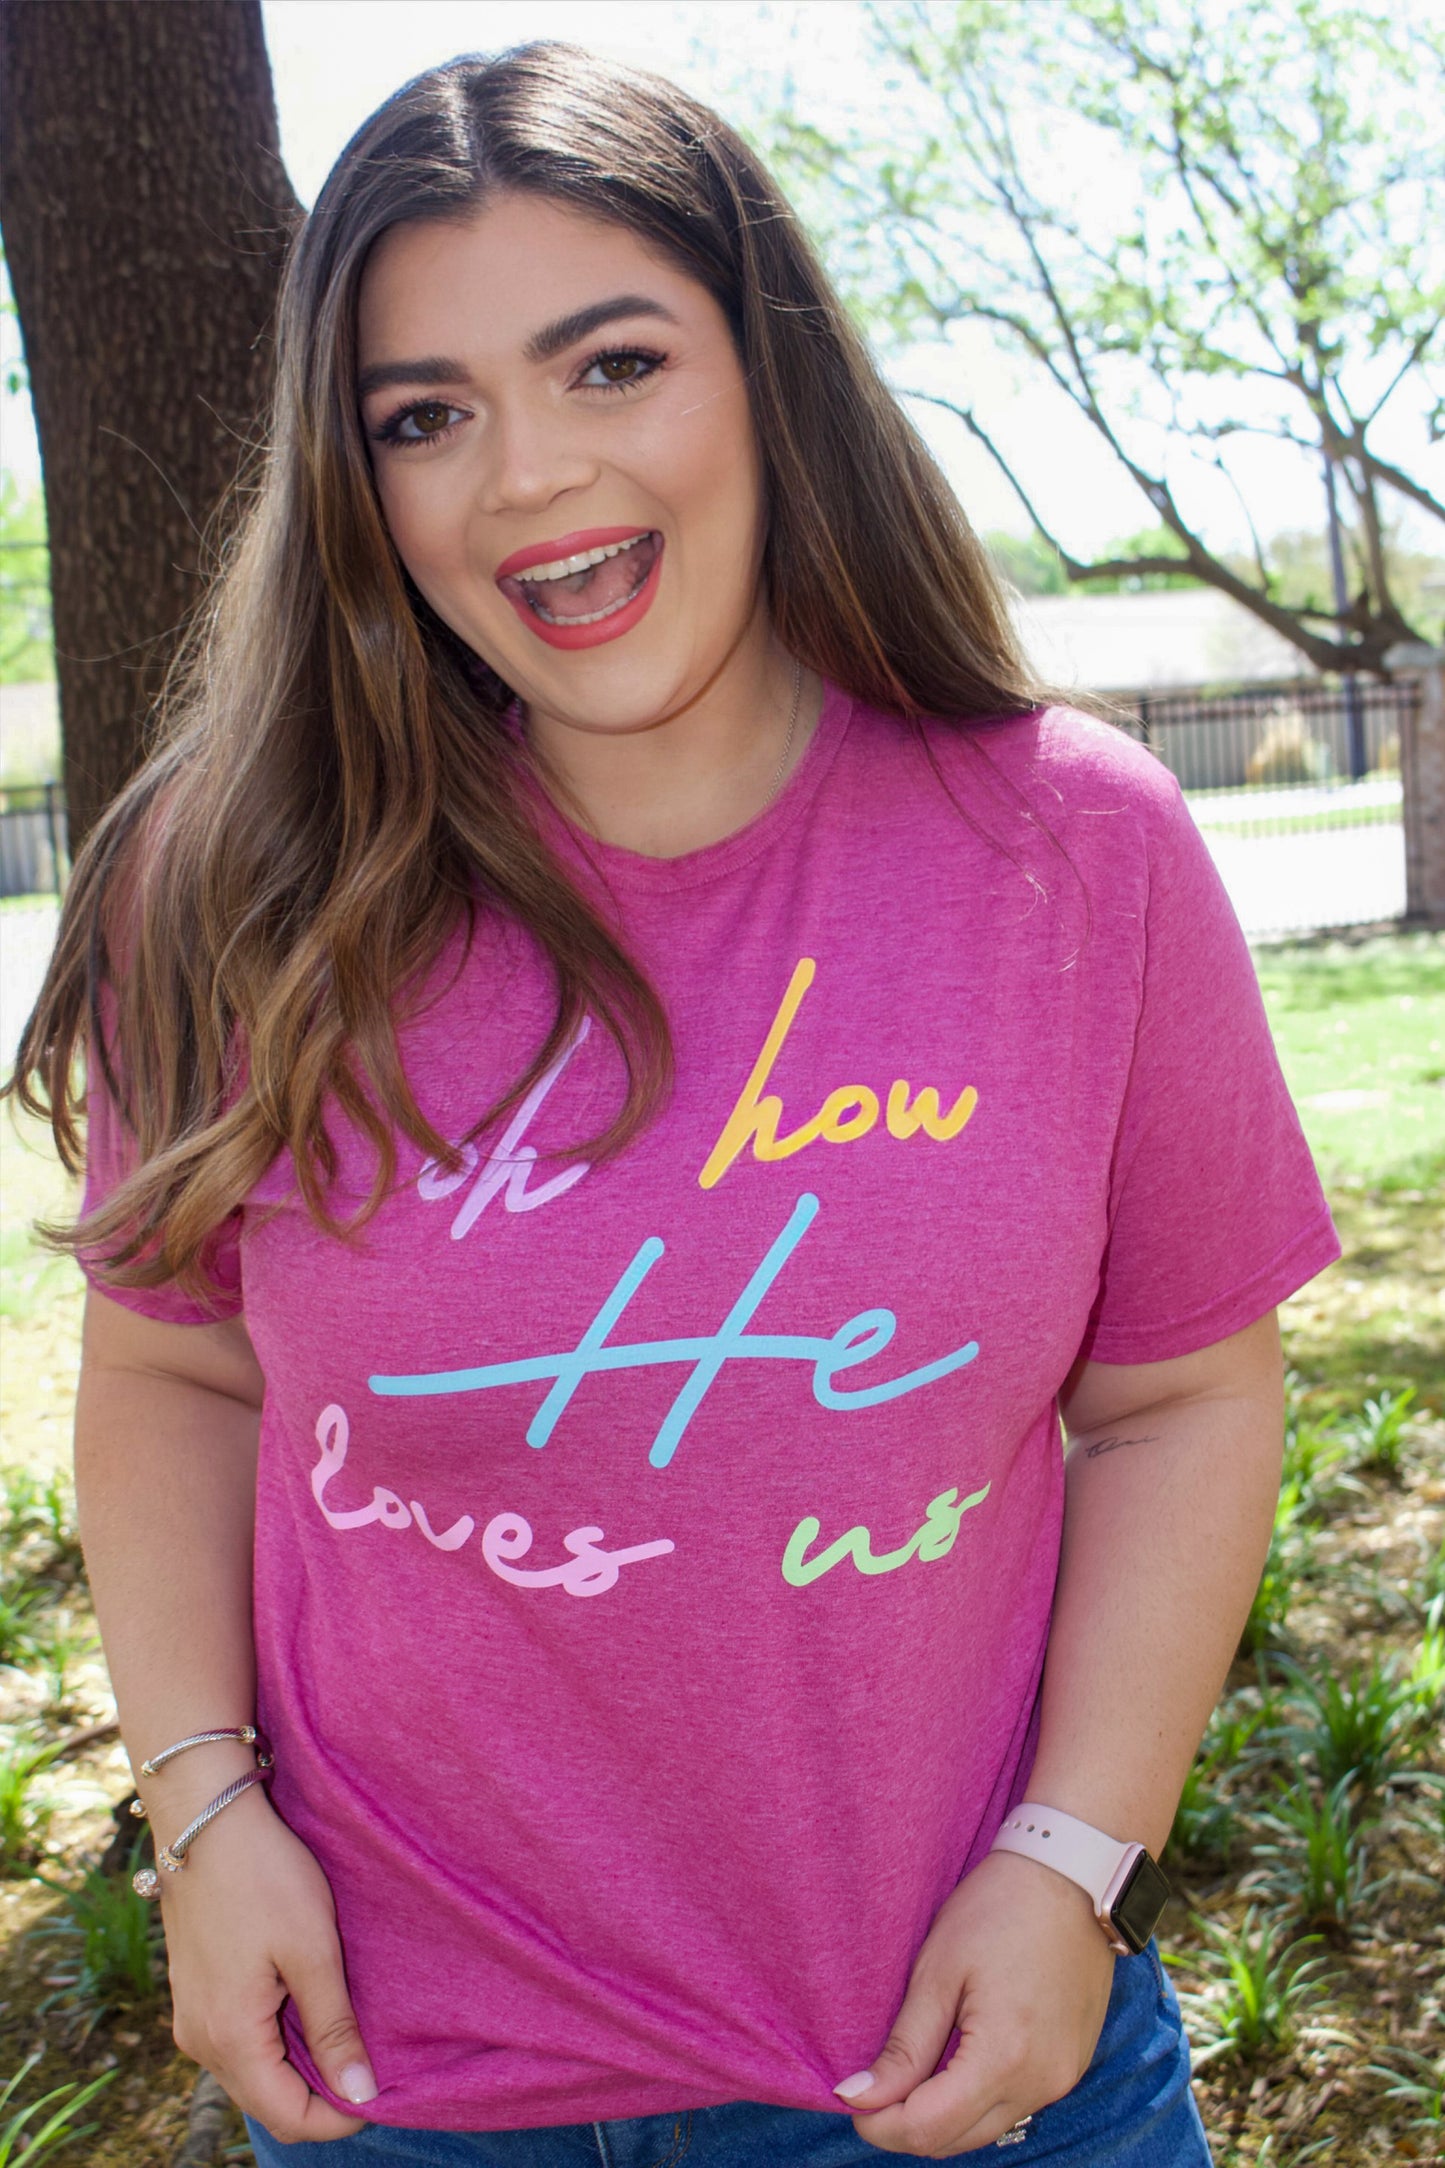 Oh how He loves us tee